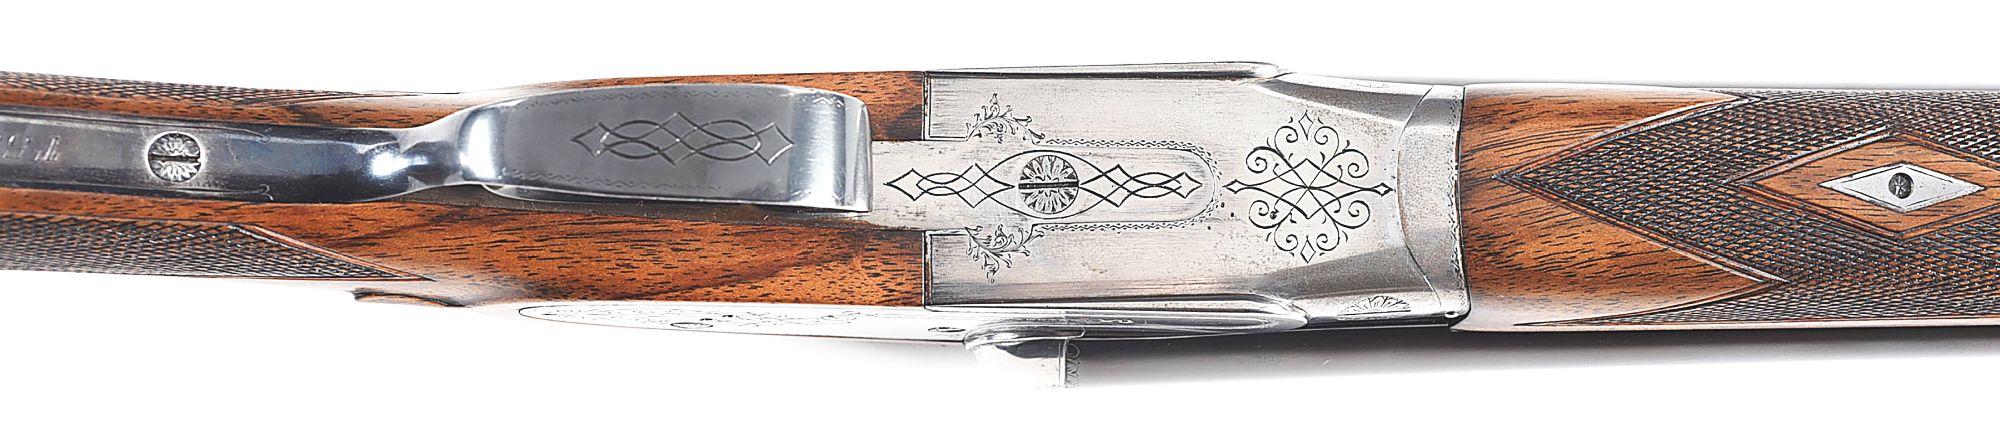 (C) WESTLY RICHARDS THE NEWCOME 16 GAUGE SIDE BY SIDE SHOTGUN